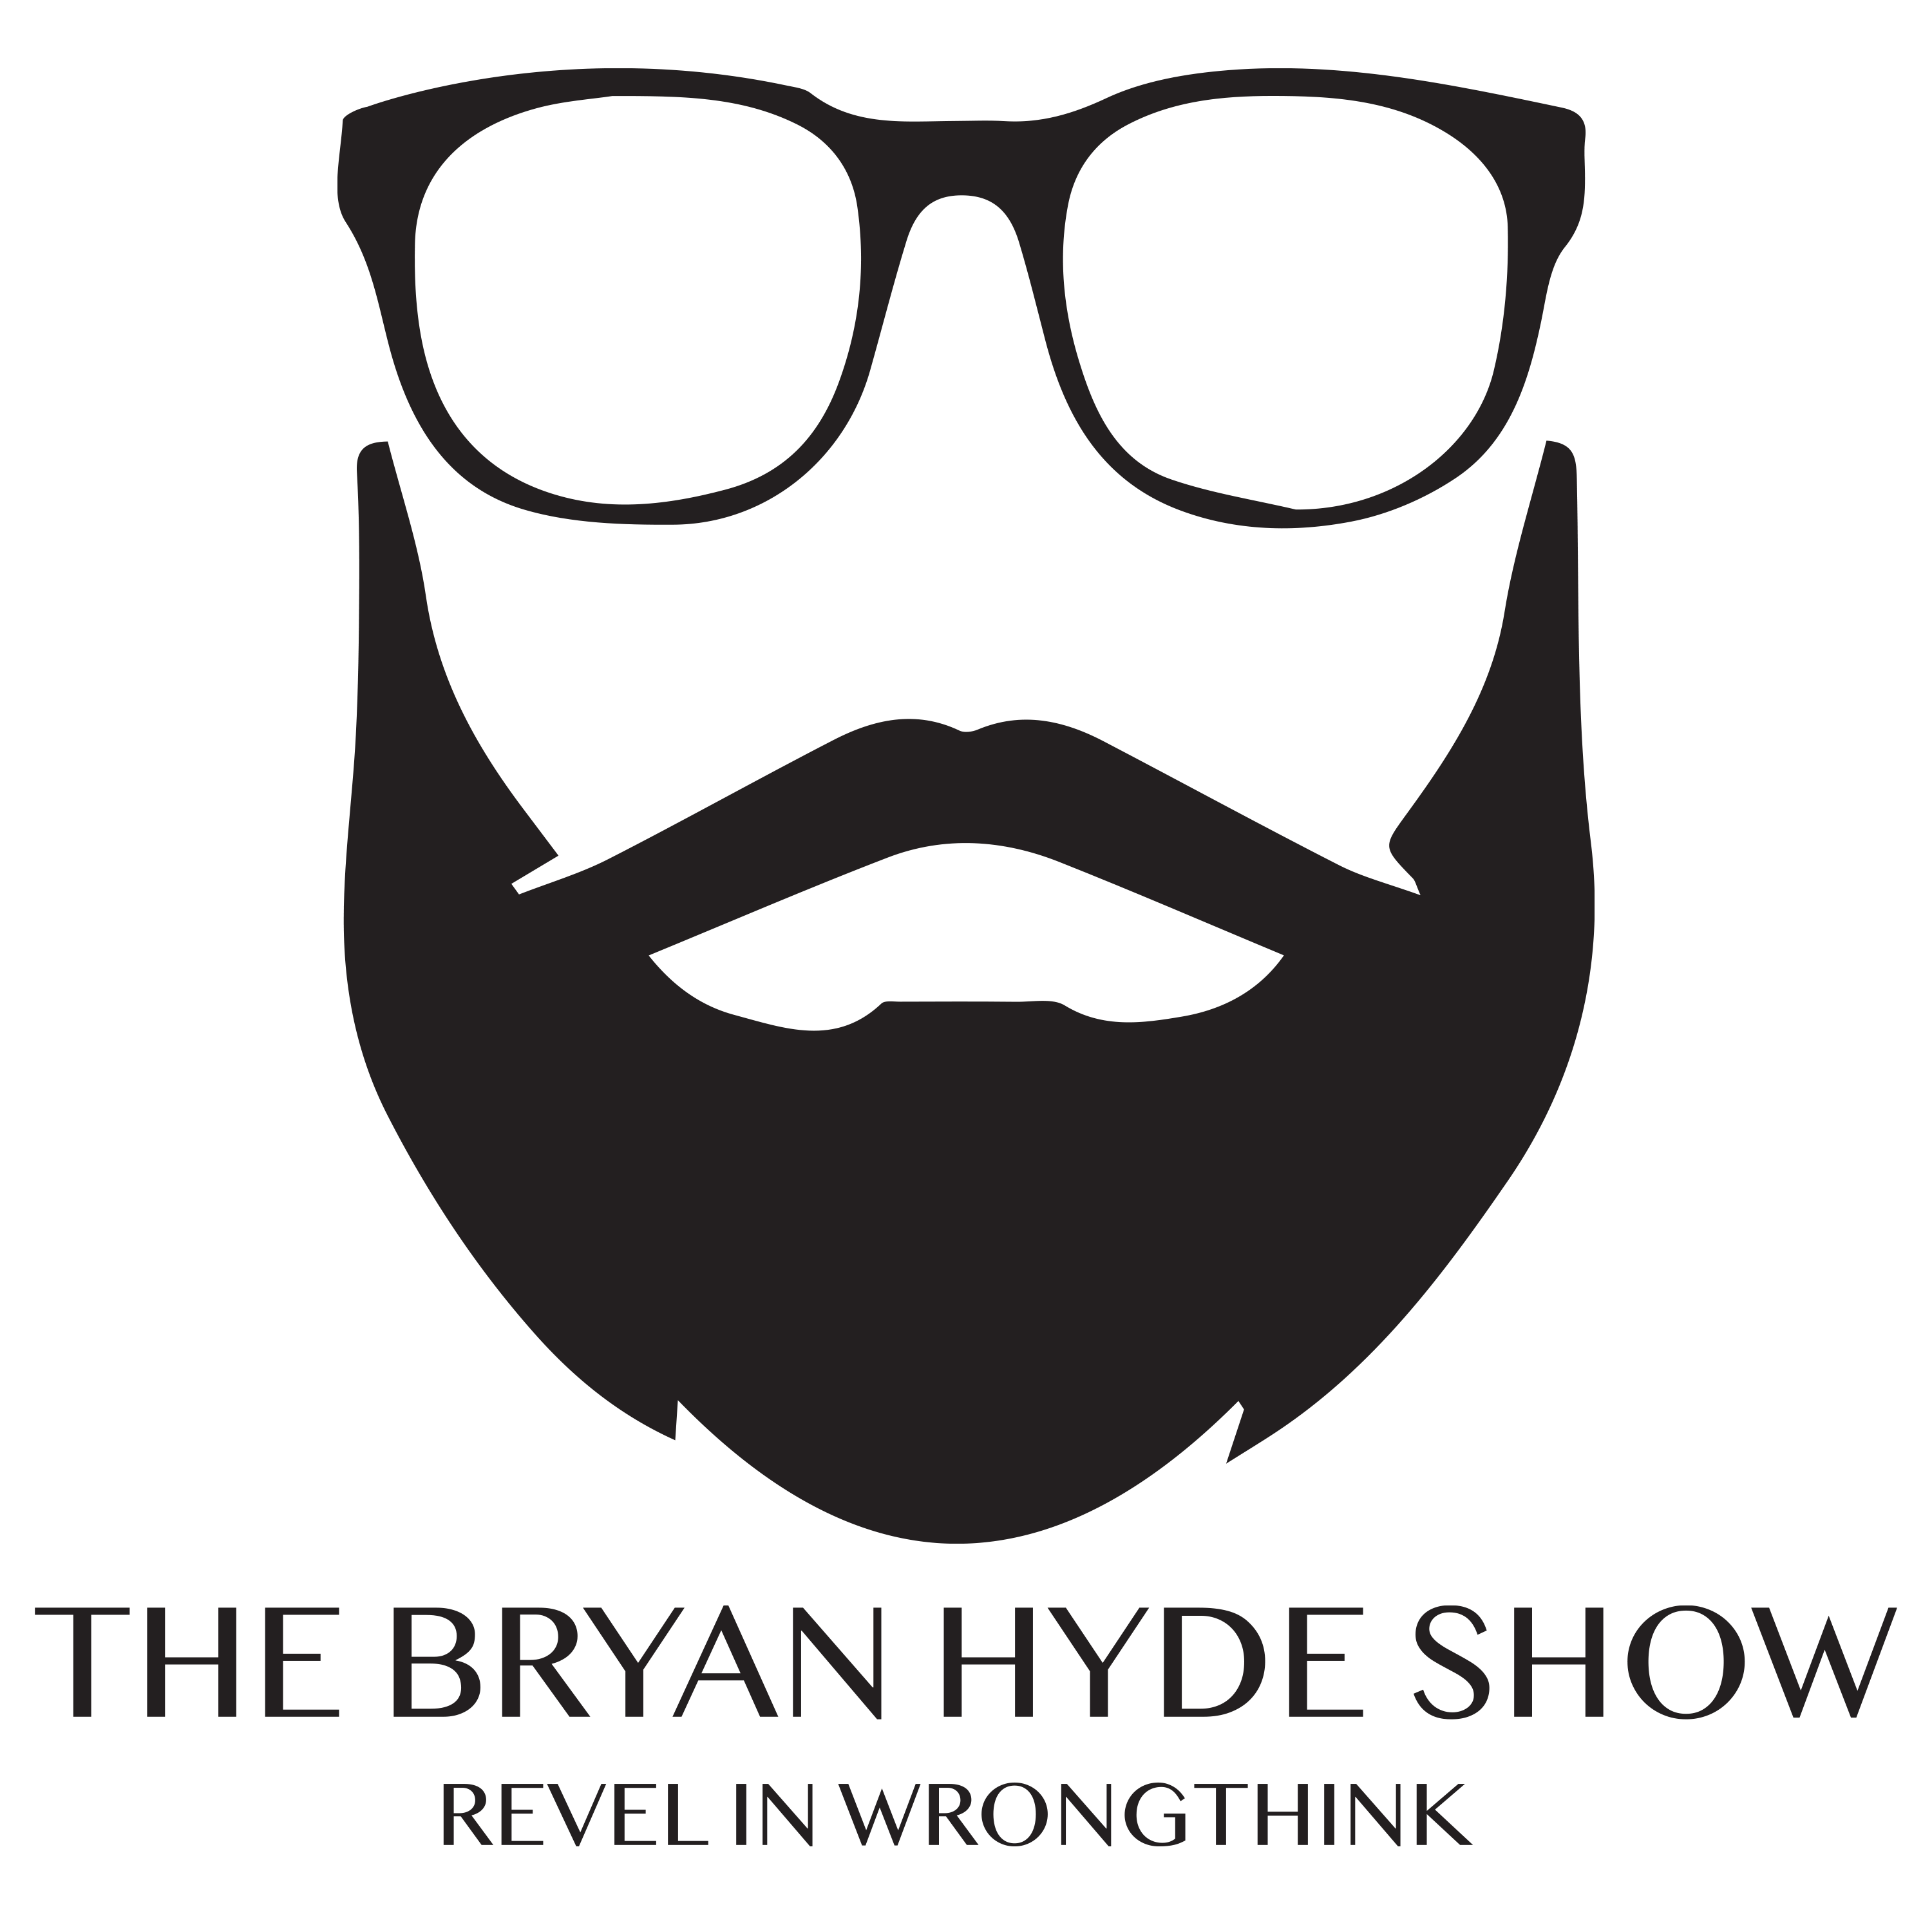 The Bryan Hyde Show